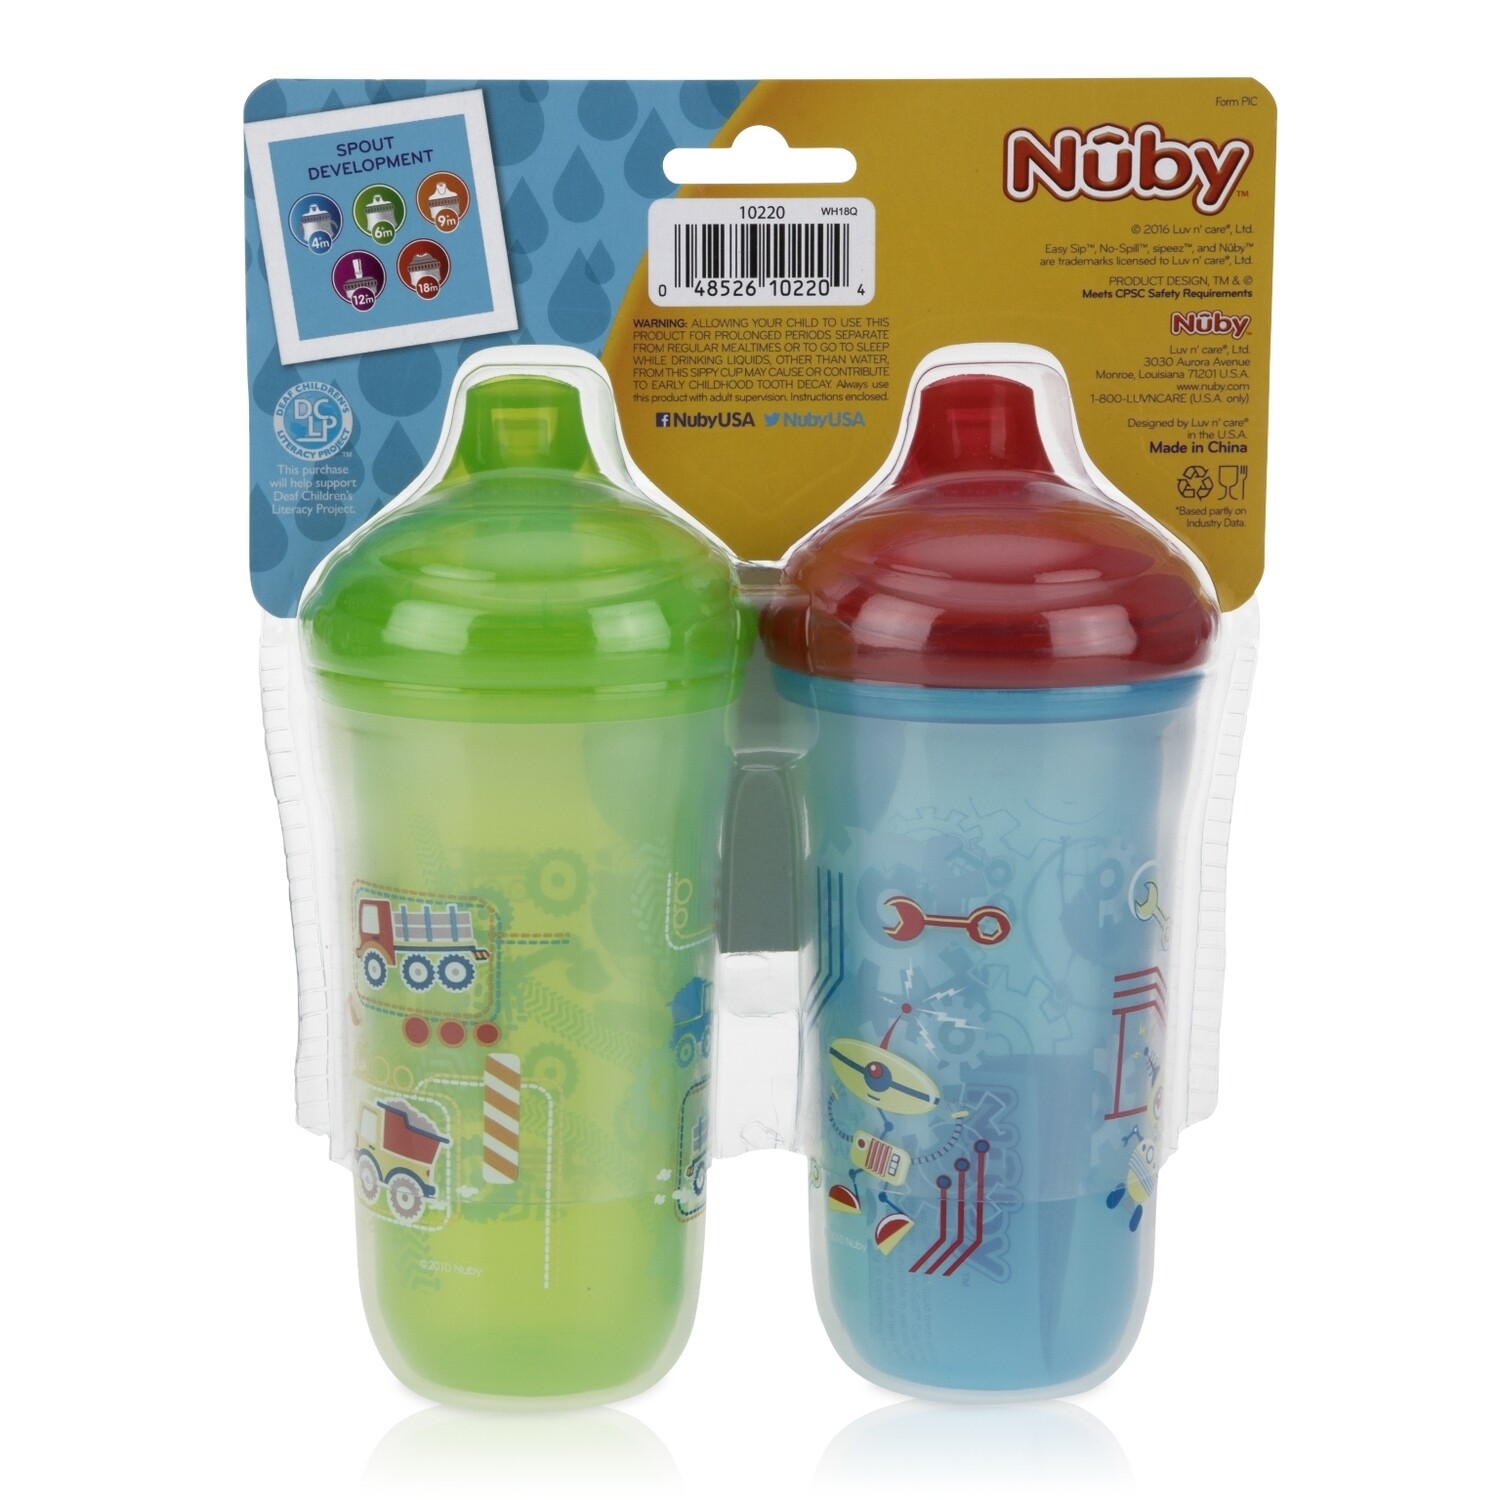 . Case of [36] Nuby No-Spill Sippers - Insulated, Plastic .